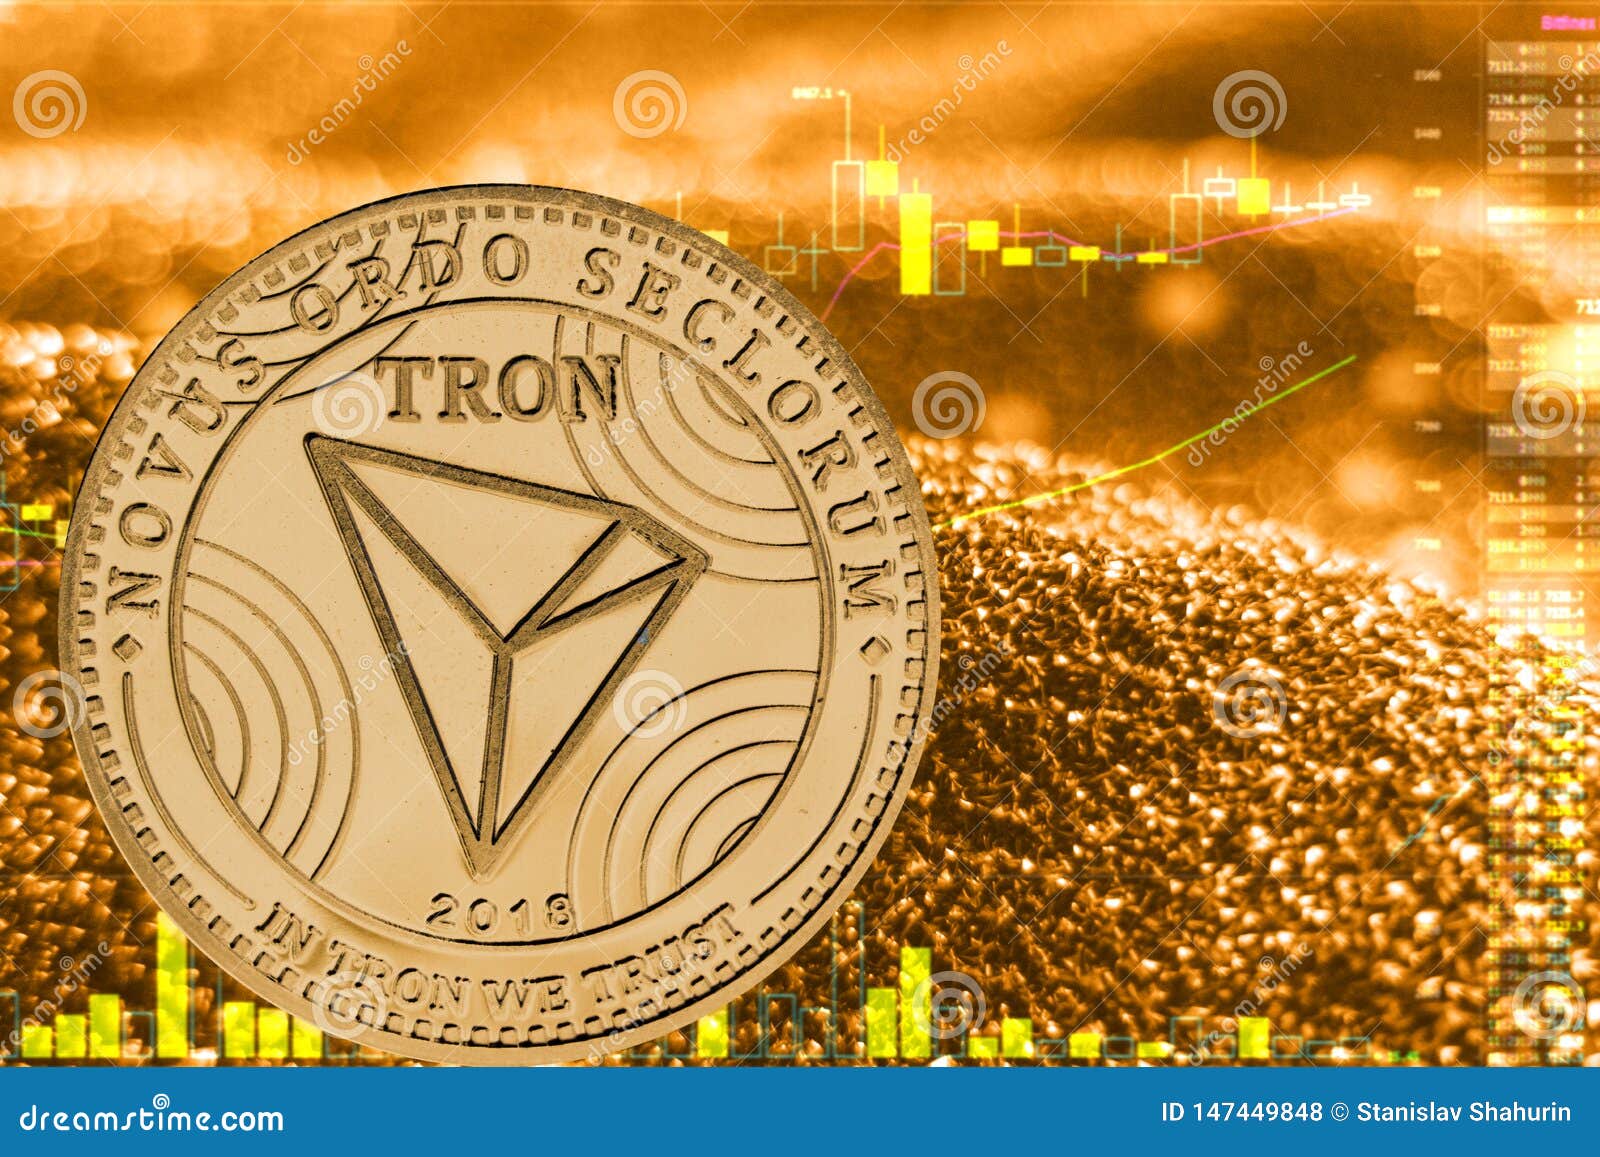 TRON (TRX) Blockchain Platform Explained and How Does It Work?